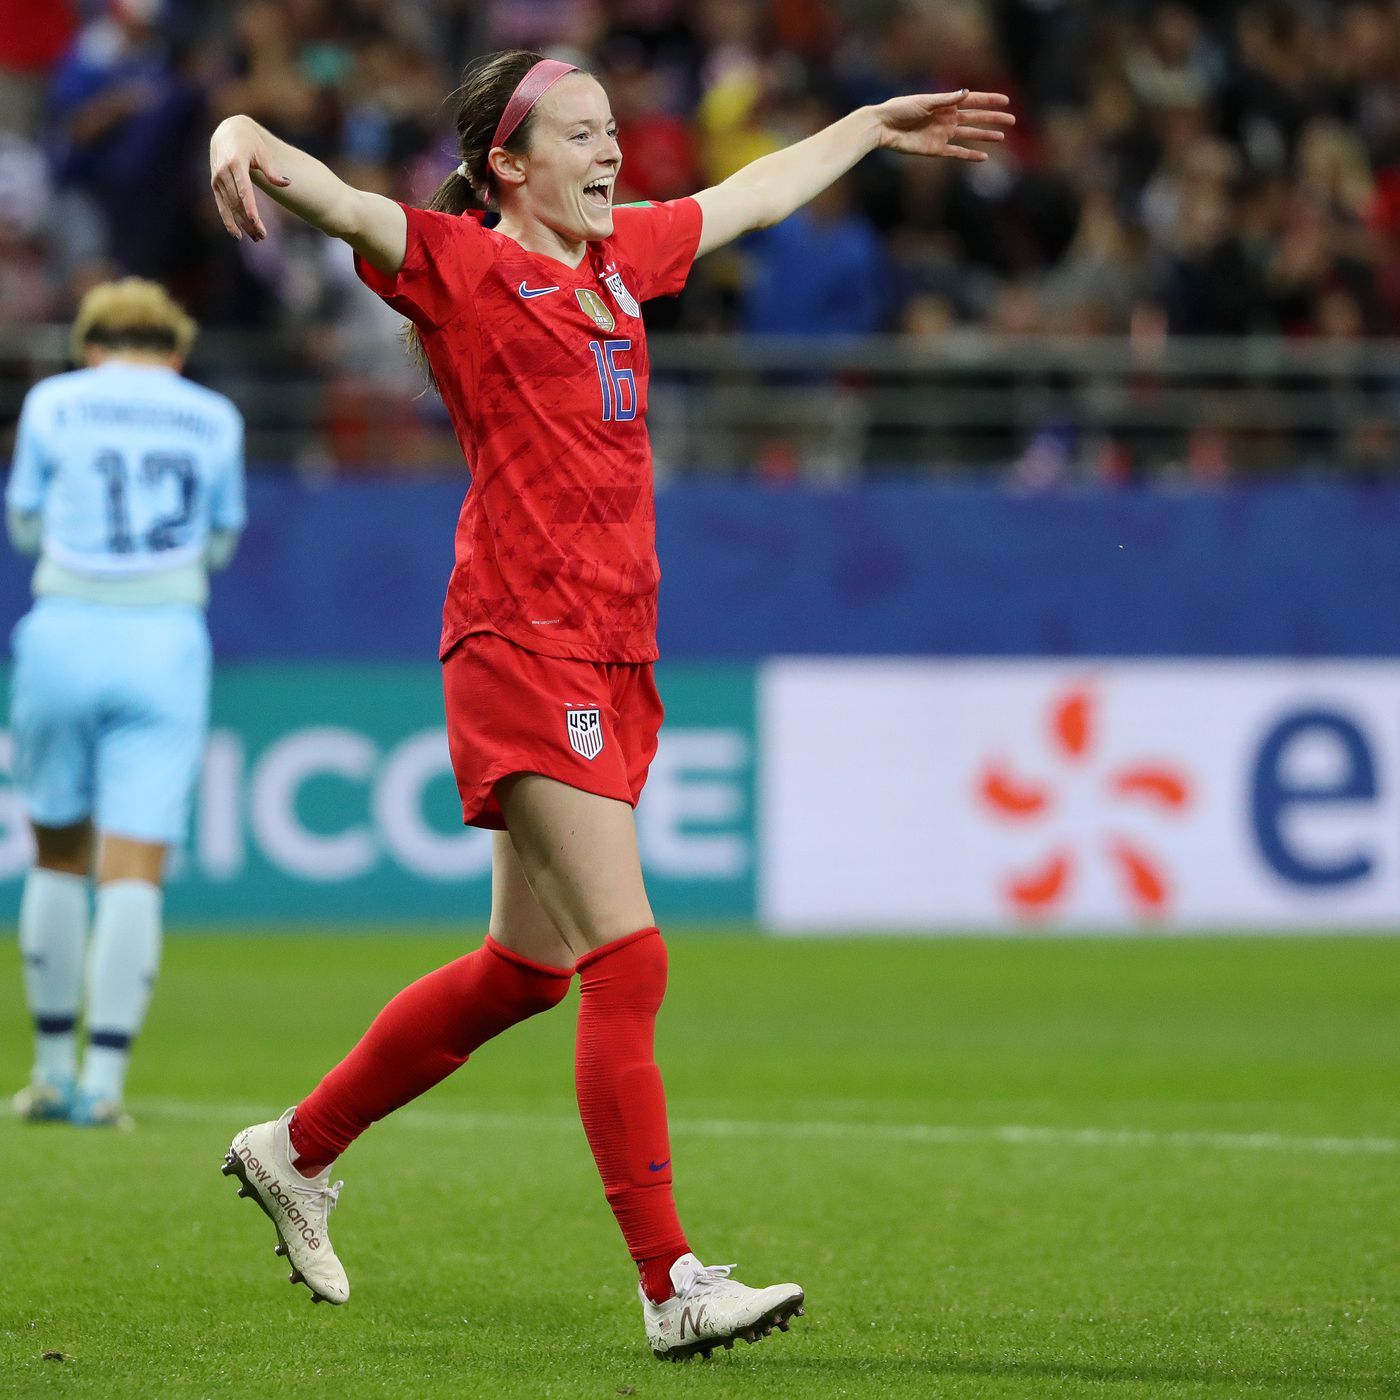 Women's World Cup: USWNT kicks ass, takes names as Rose Lavelle scores's 5th Quarter